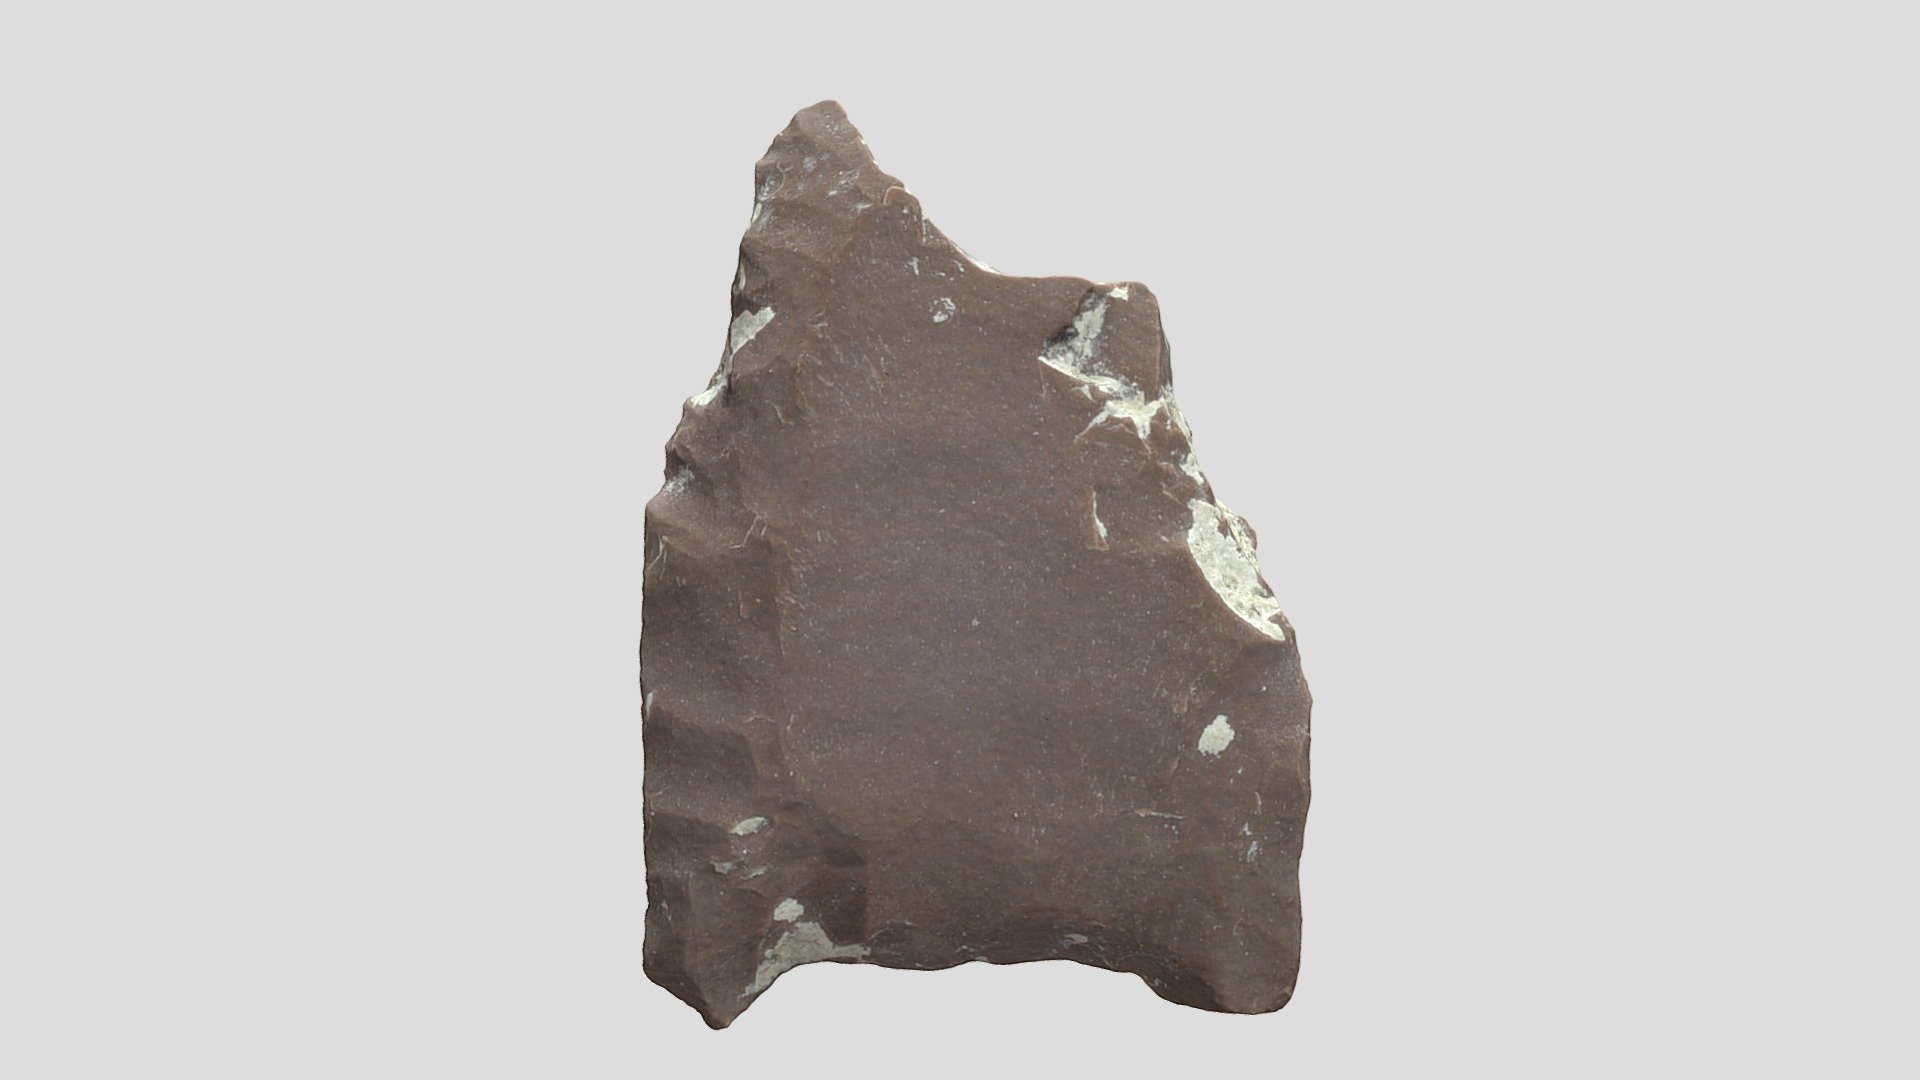 Folsom Projectile Point - Reworked